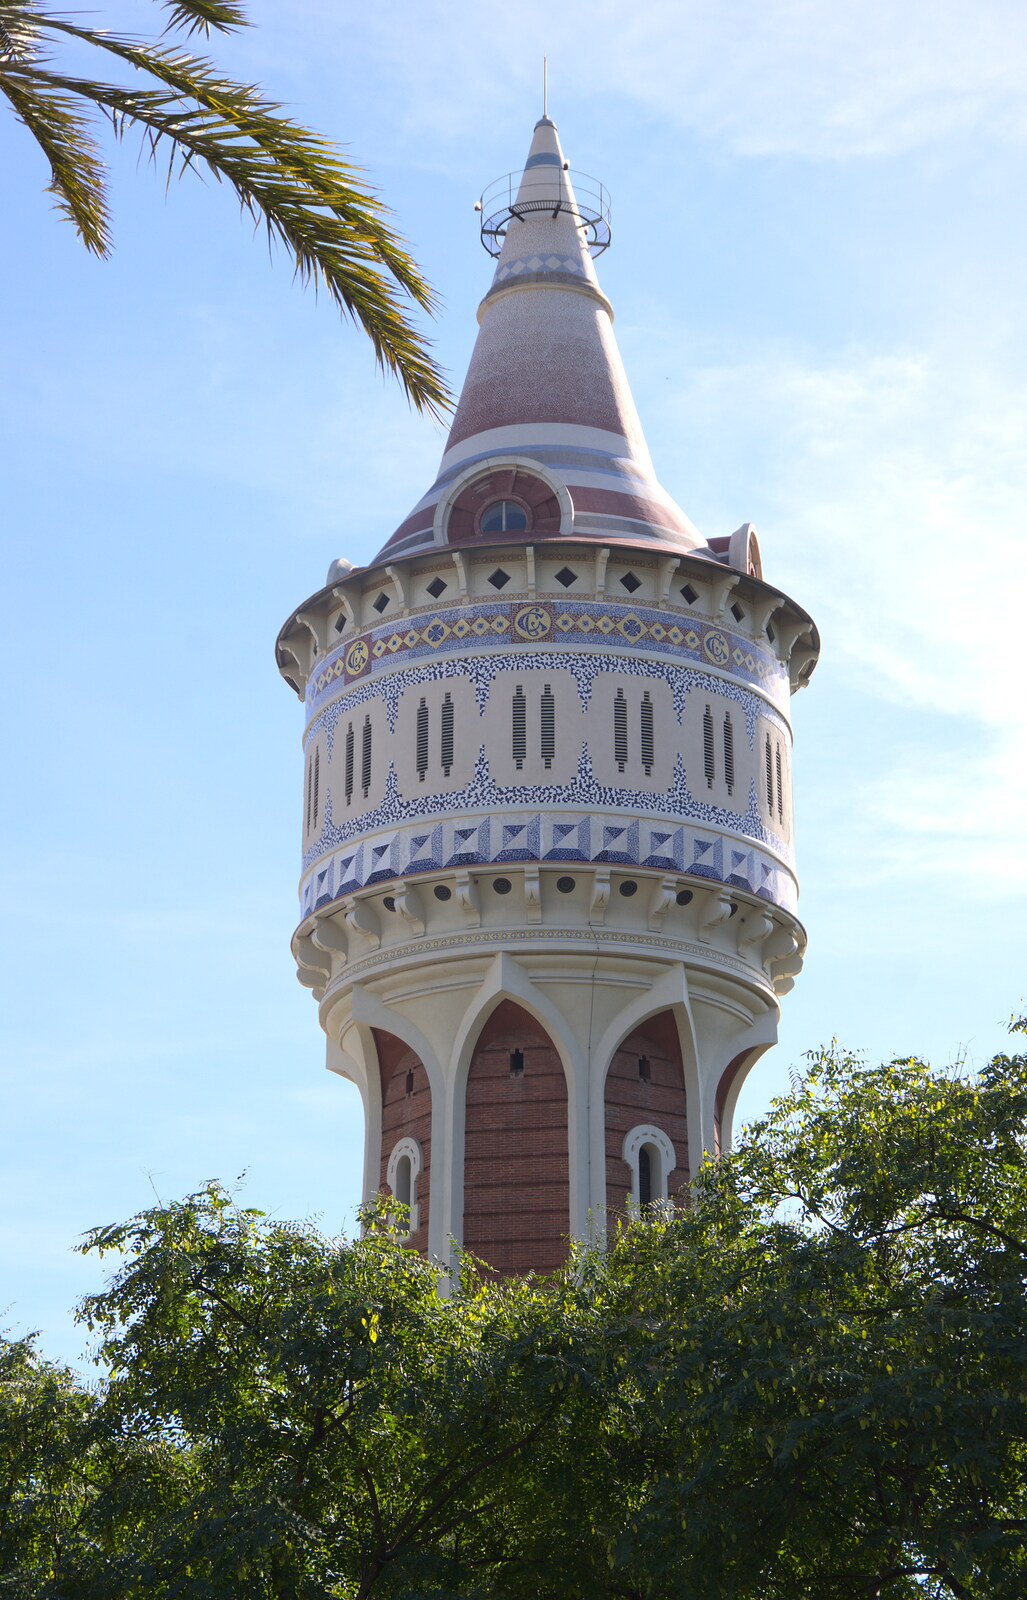 Barcelona's original water tower from A Barcelona Bus Tour, Catalonia, Spain - 25th October 2017